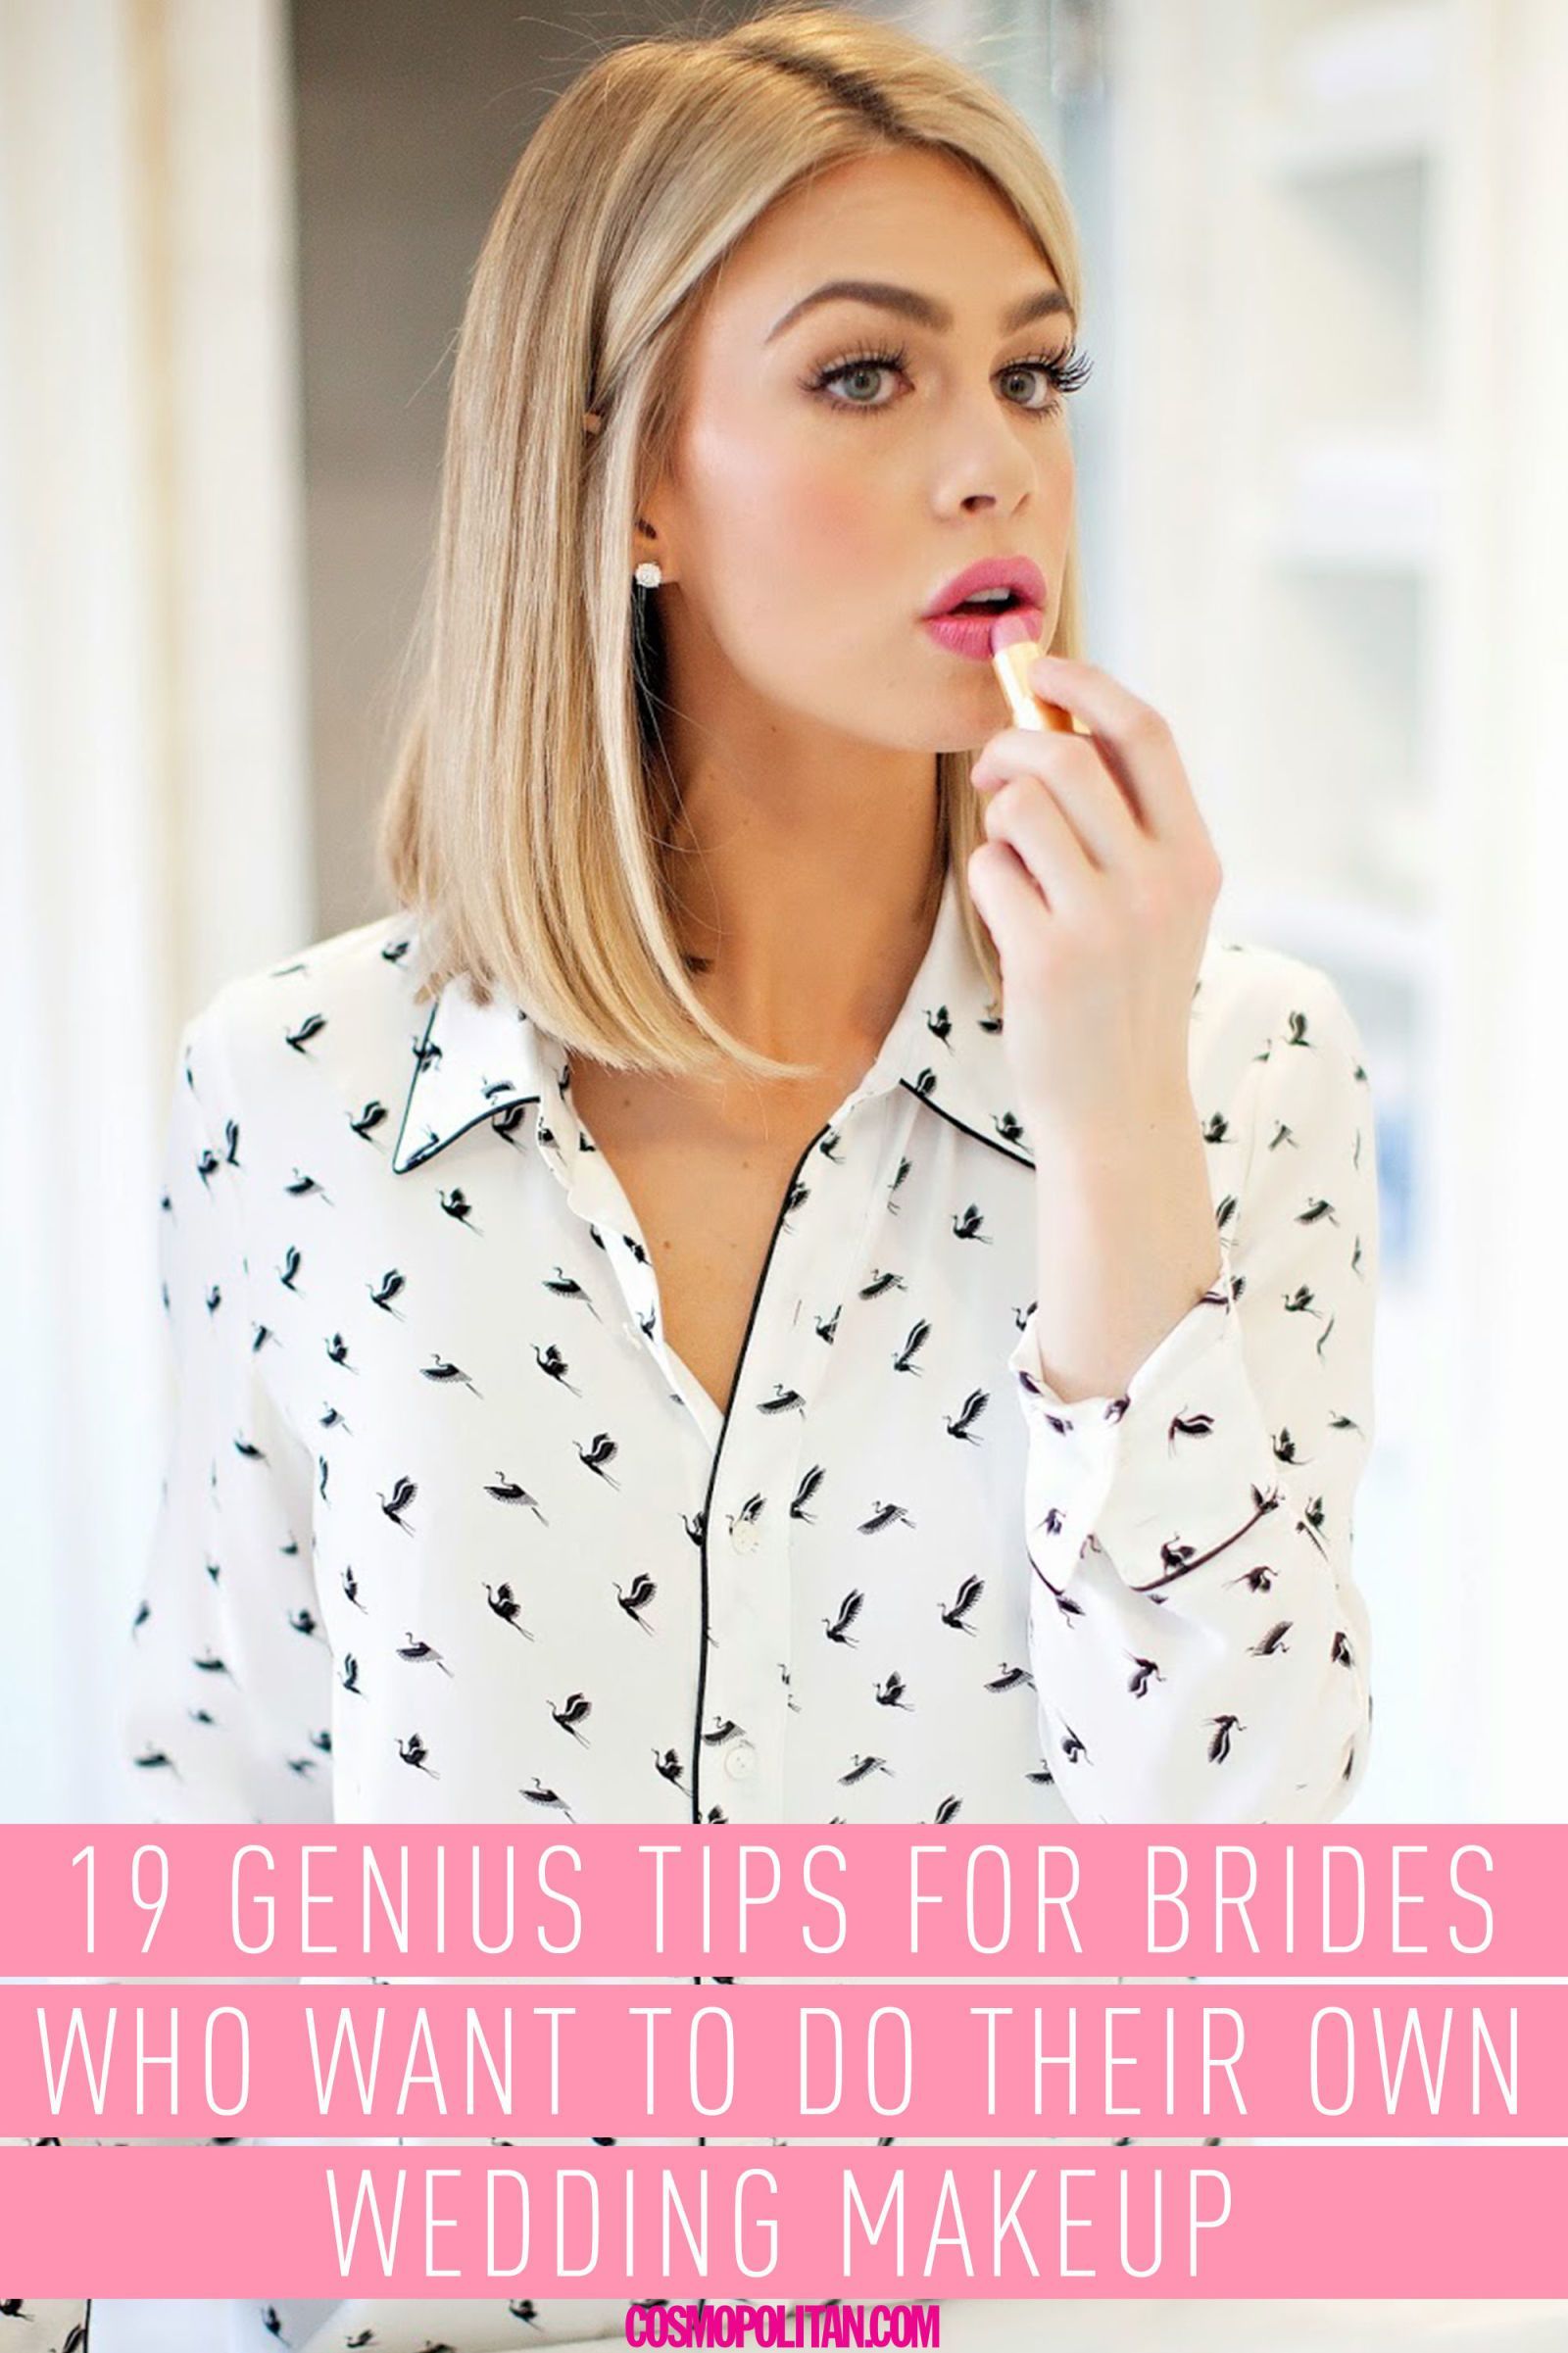 Pro makeup artists share their secrets for making your wedding makeup last and look flawless all day (and night) long.